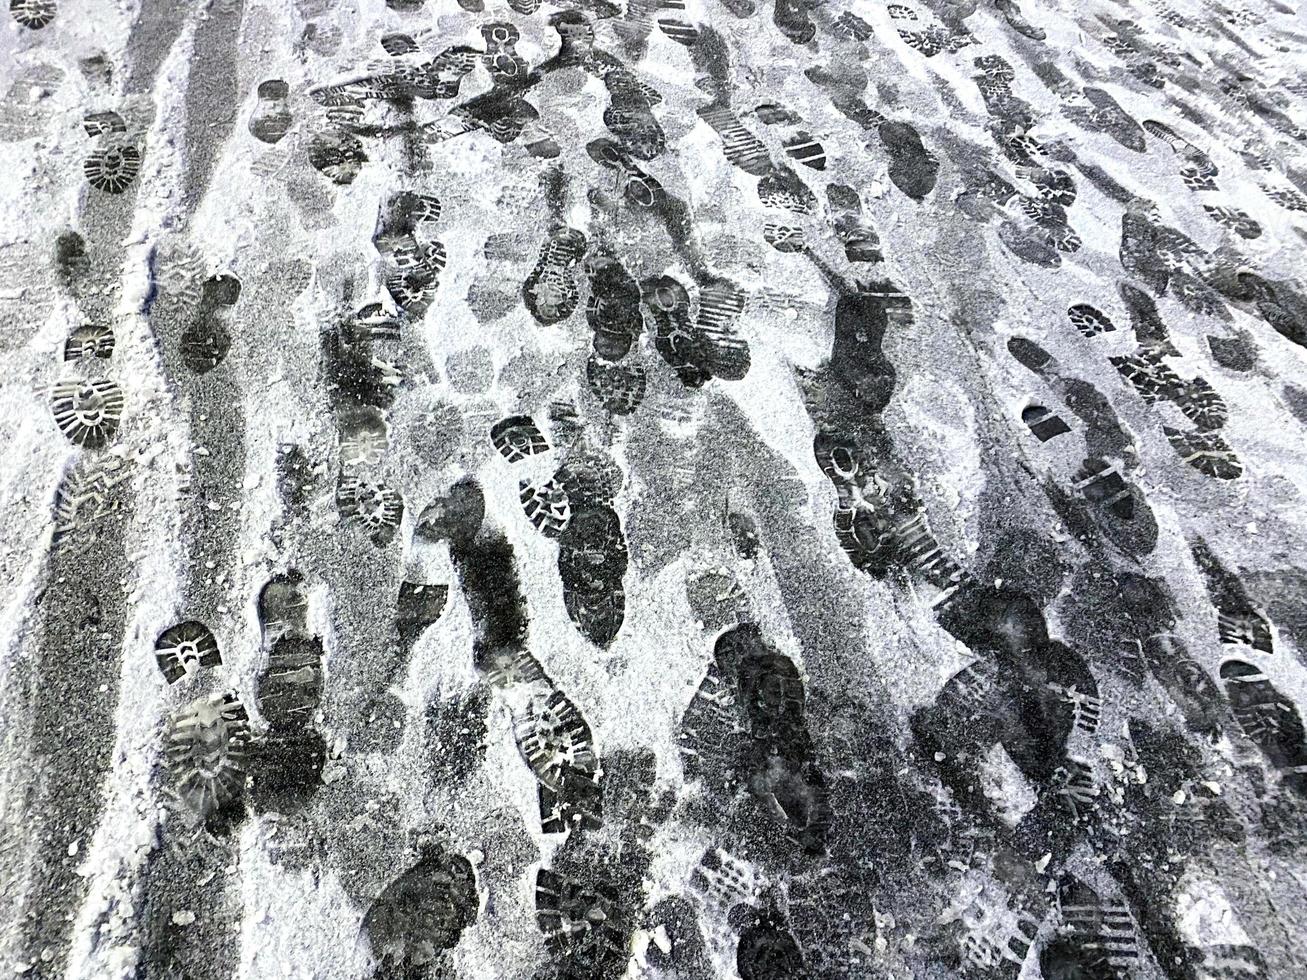 Footprints of people in the snow. photo